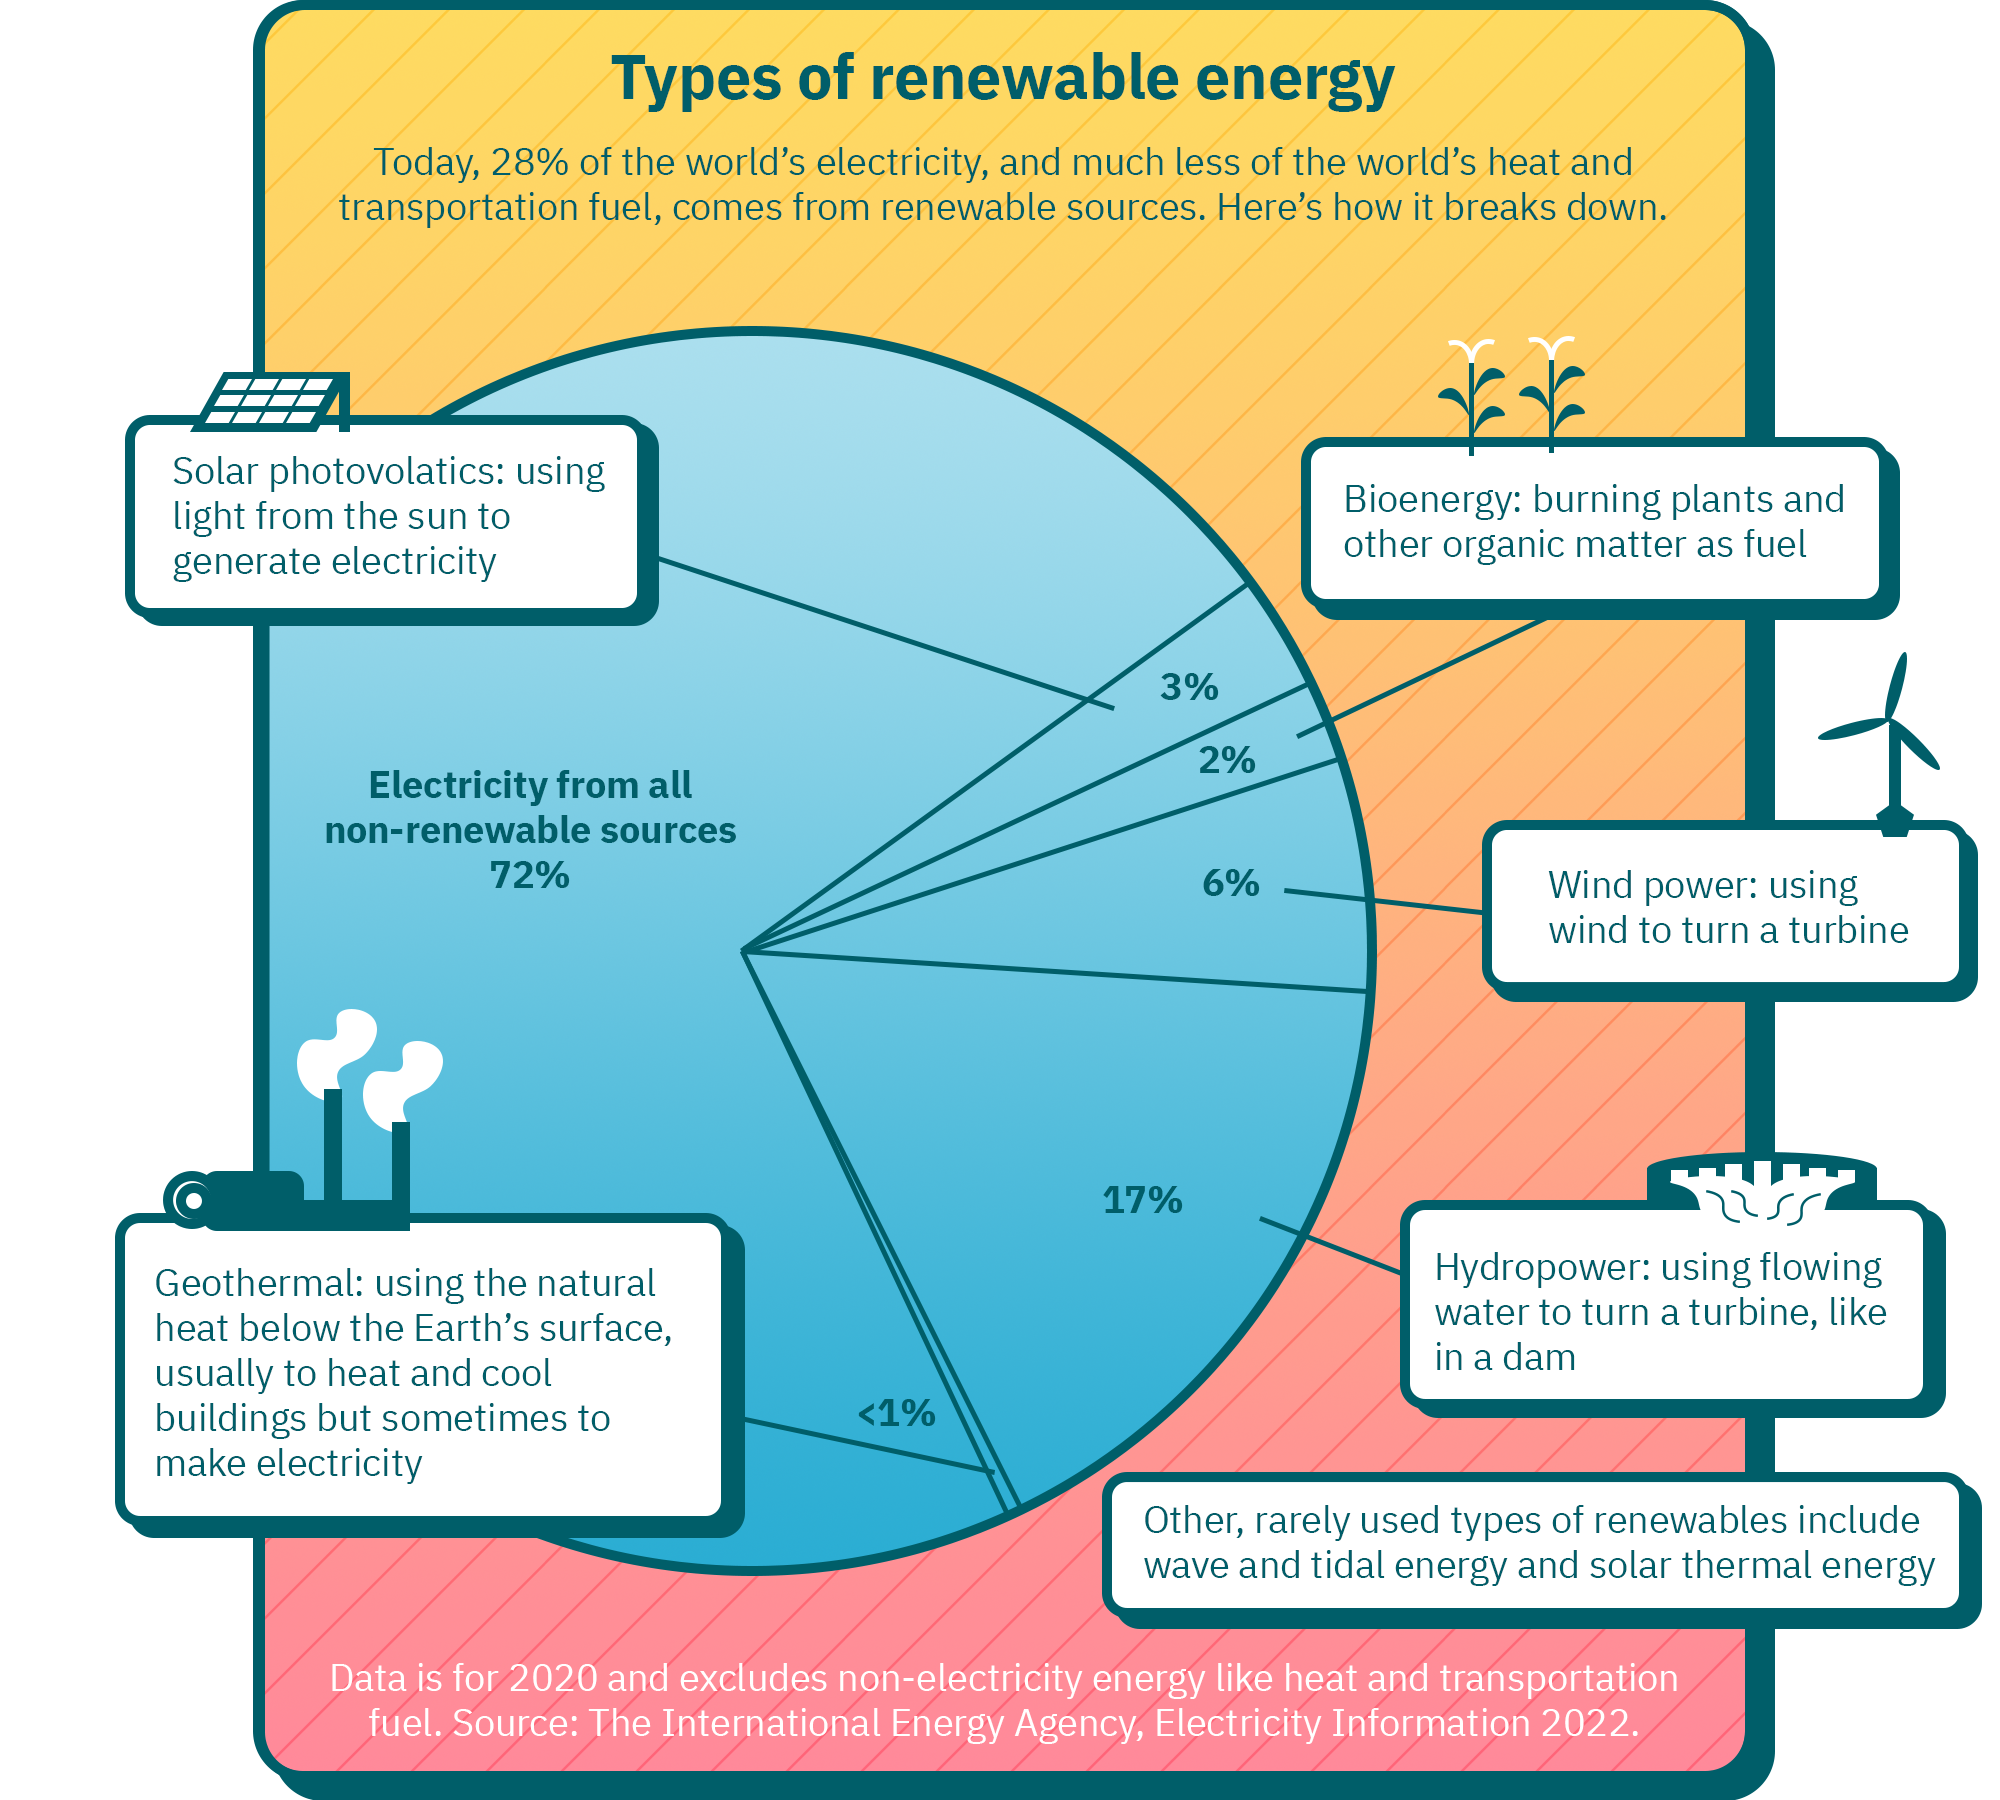 Infographic: Types of renewable energy. Today, 28% of the world’s electricity, and much less of the world’s heat and transportation fuel, comes from renewable sources. Here’s how it breaks down. Data is for 2020 and excludes non-electricity energy like heat and transportation fuel. Source: The International Energy Agency, Electricity Information 2022.